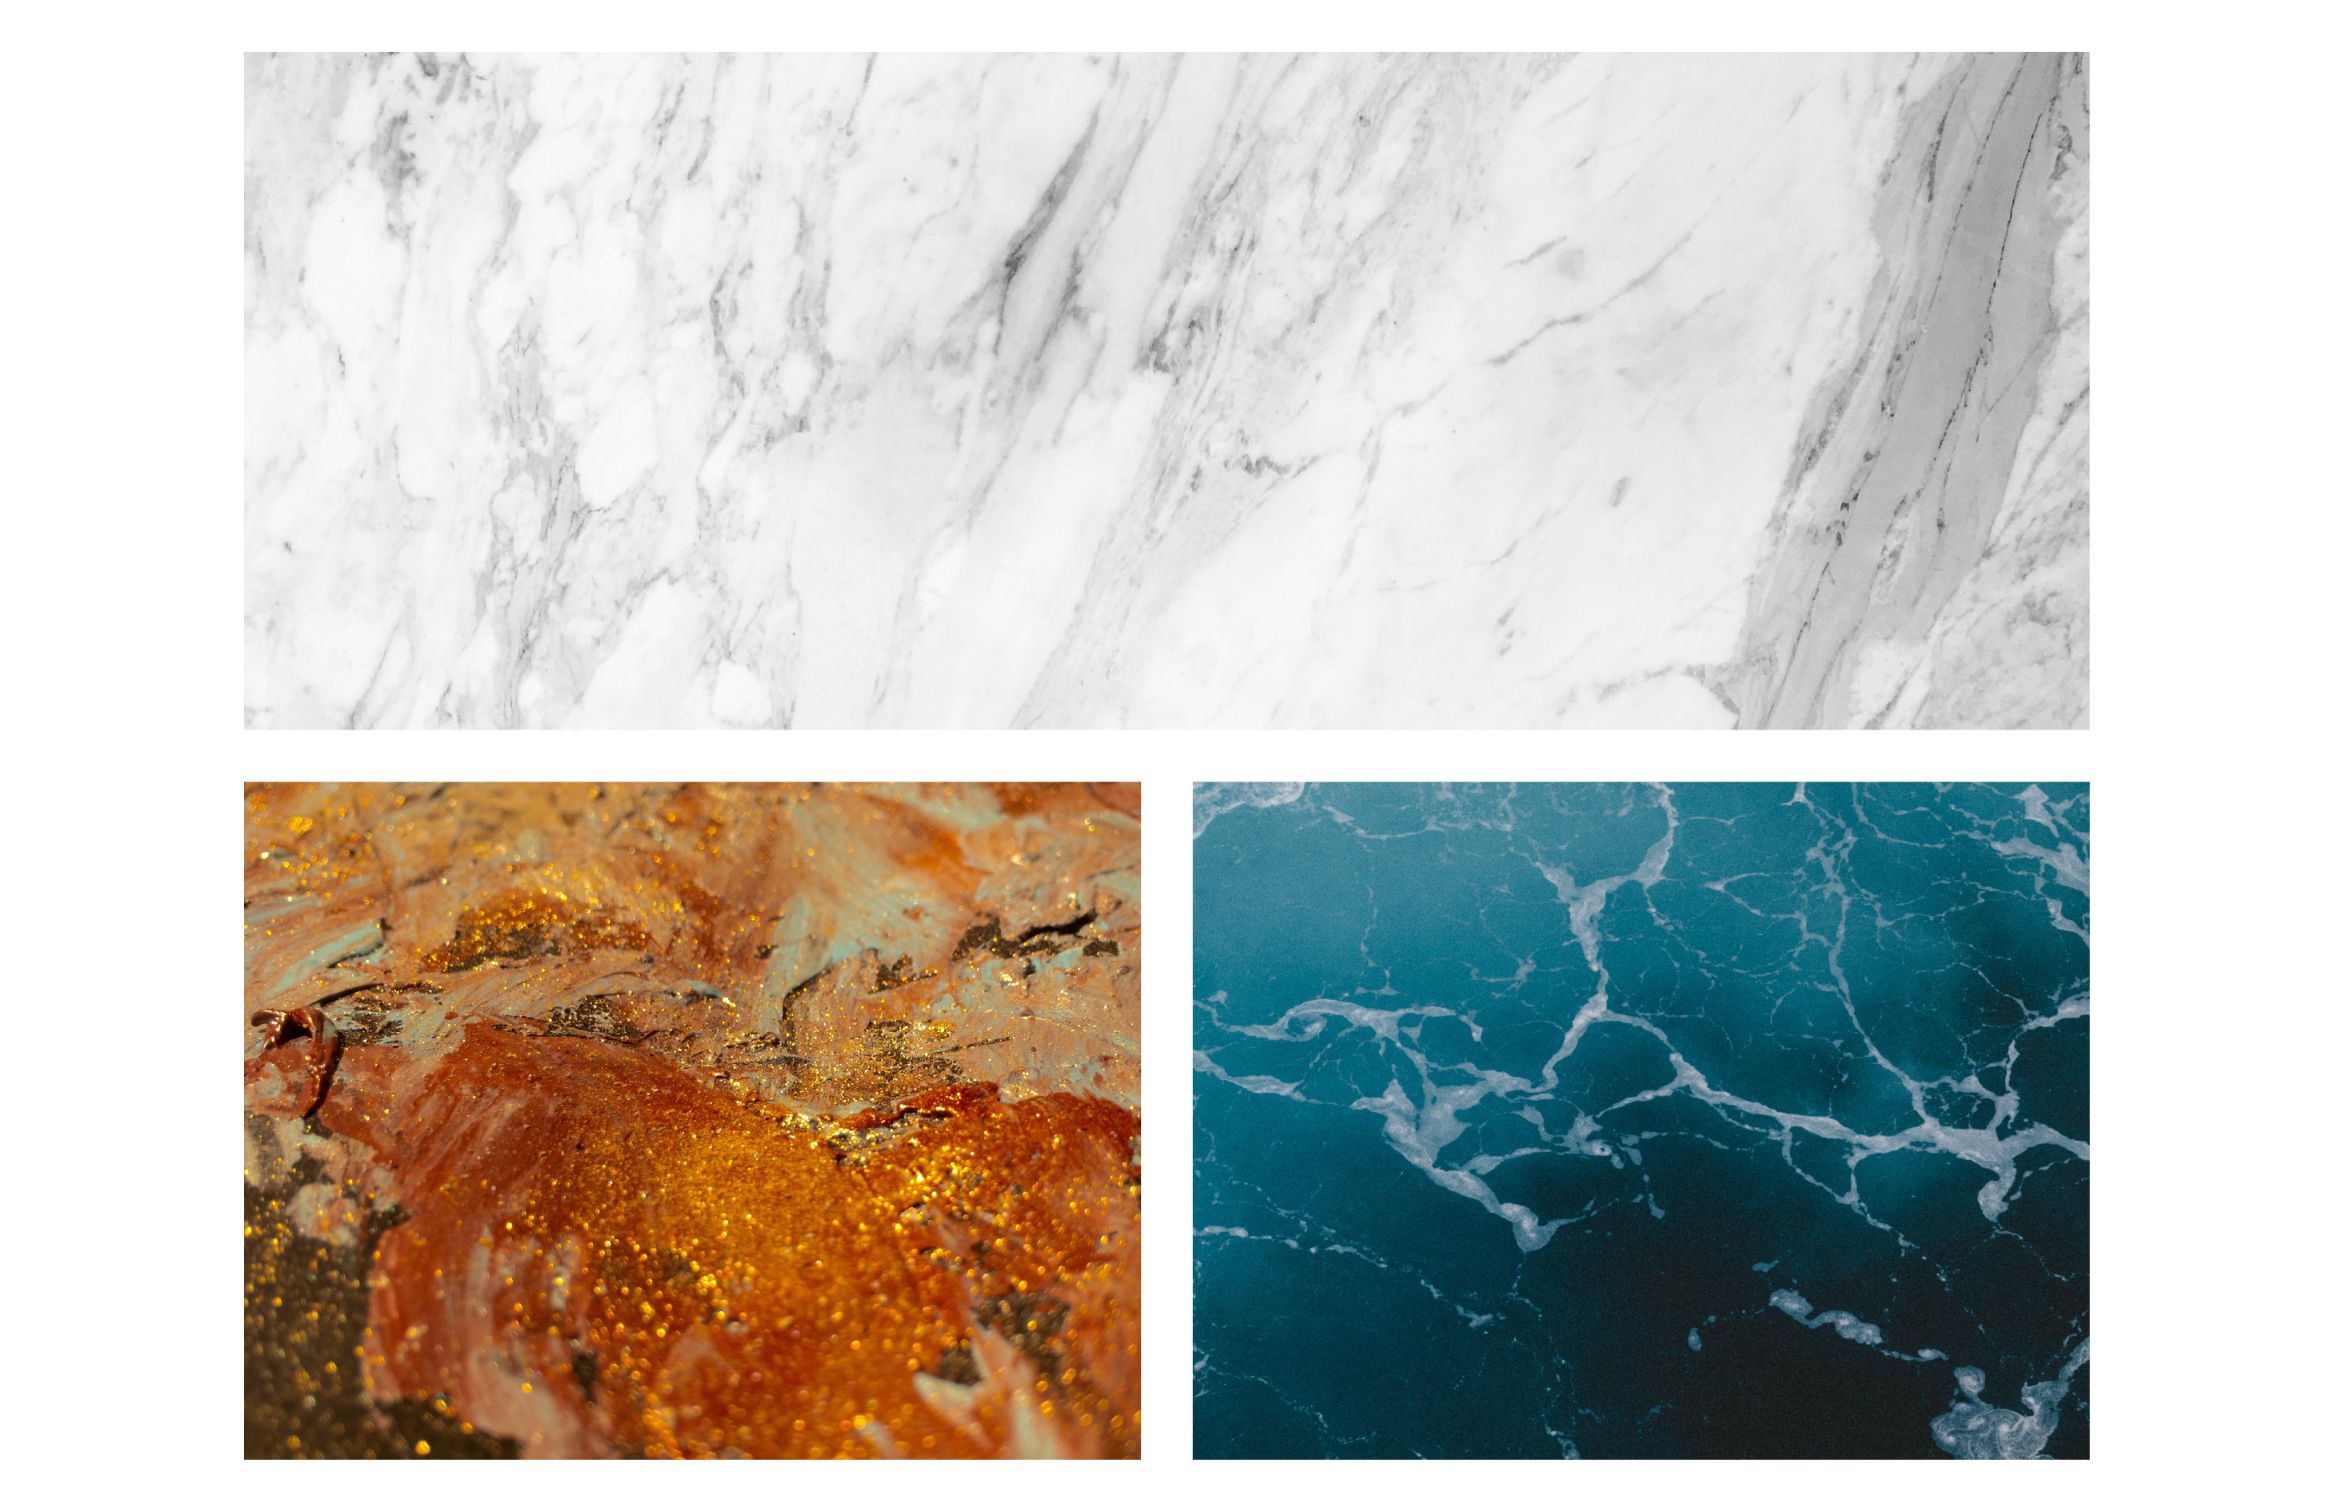 Images of a marble top, ocean see and gold dust from above